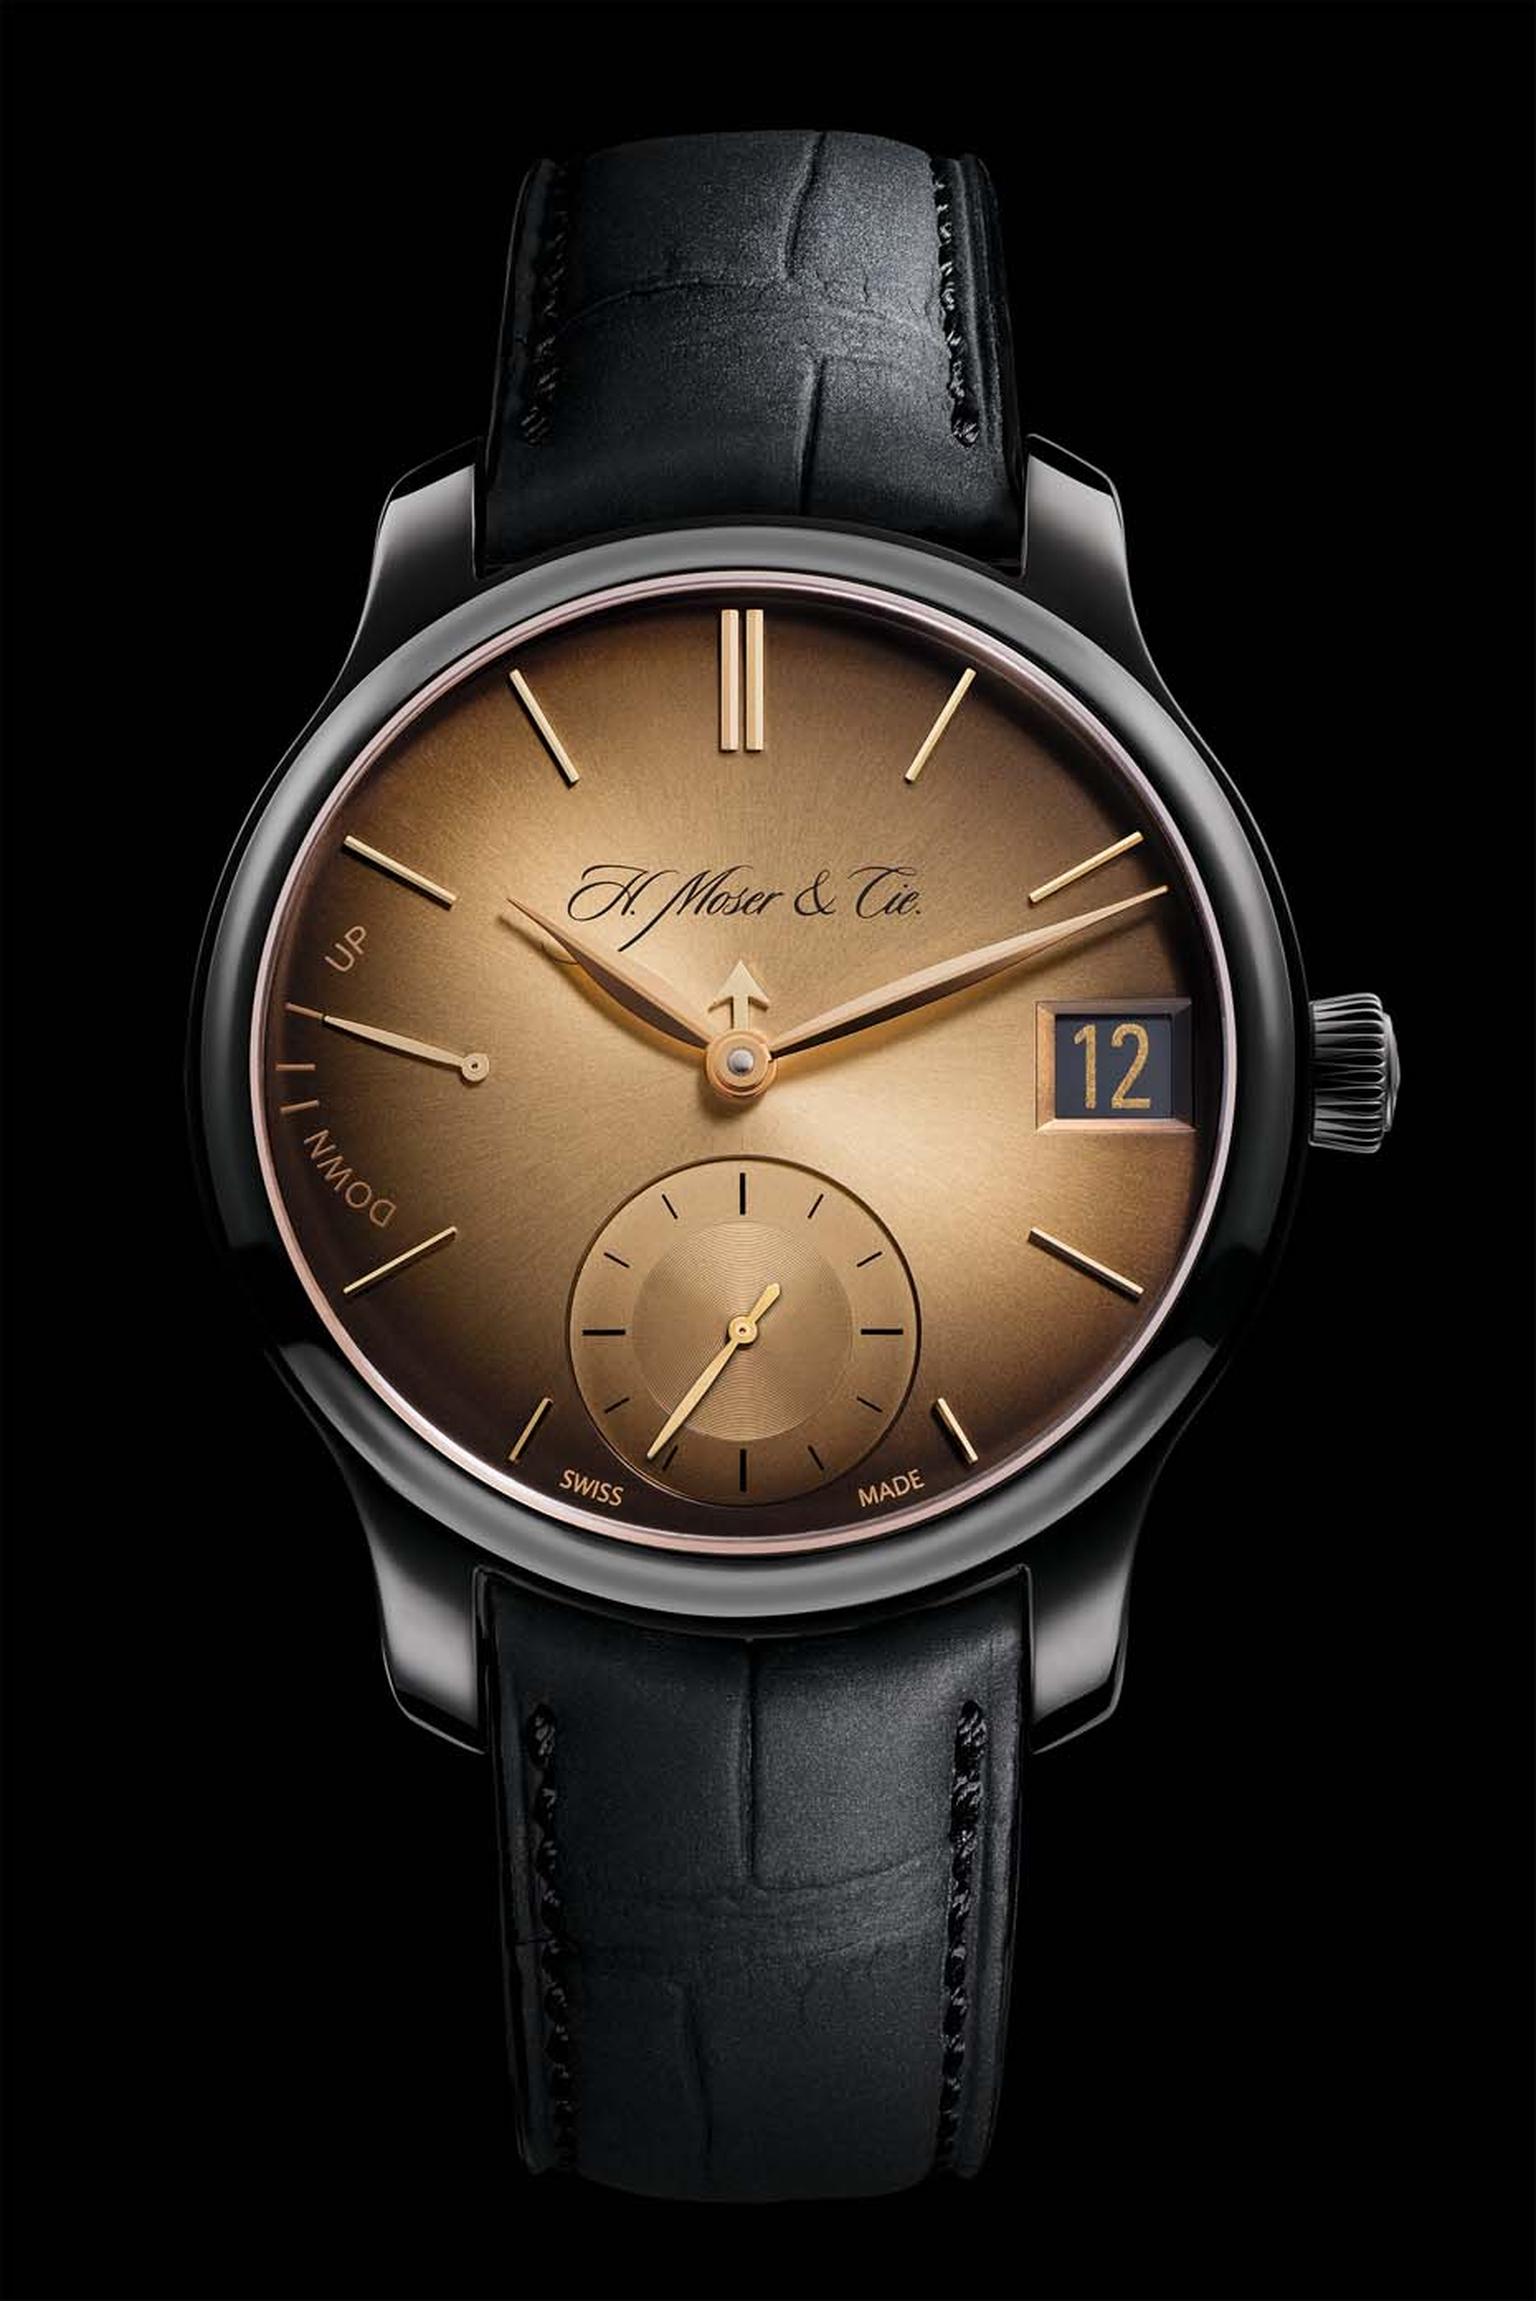 H. Moser & Cie features all the functions of a complicated perpetual calendar with a discreet short arrow anchored between the hour and minute hands acting as a month indicator.